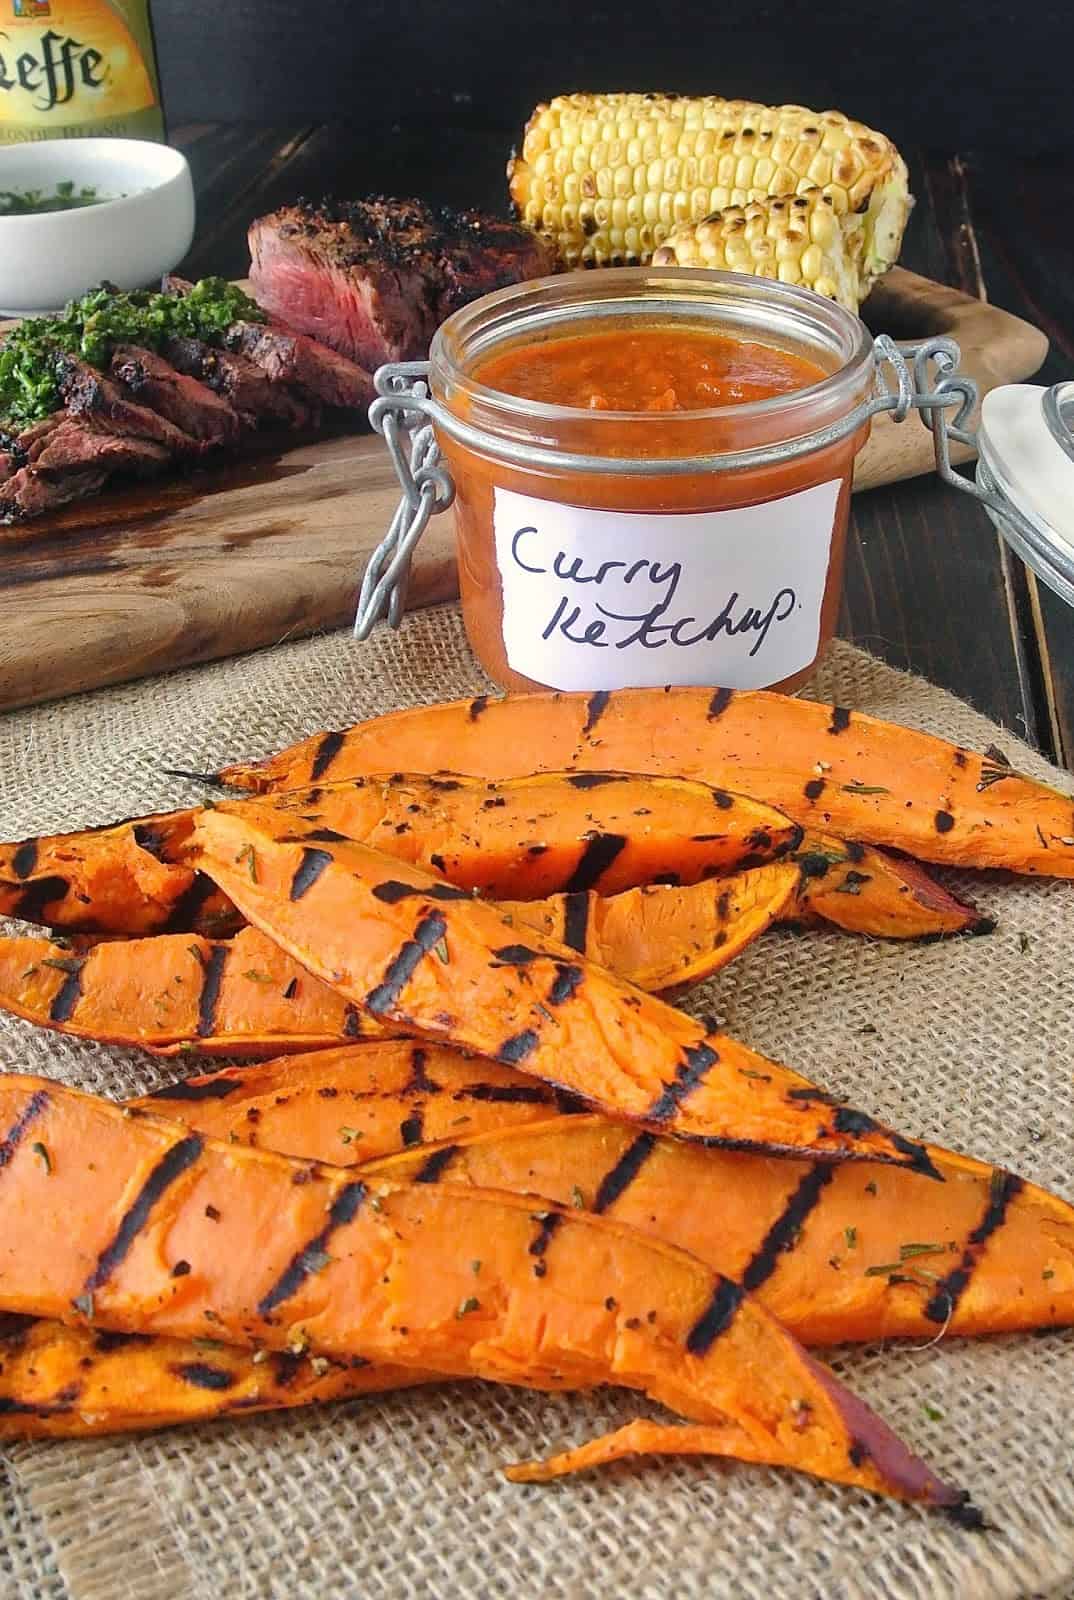 Grilled sweet potato wedges with curry ketchup